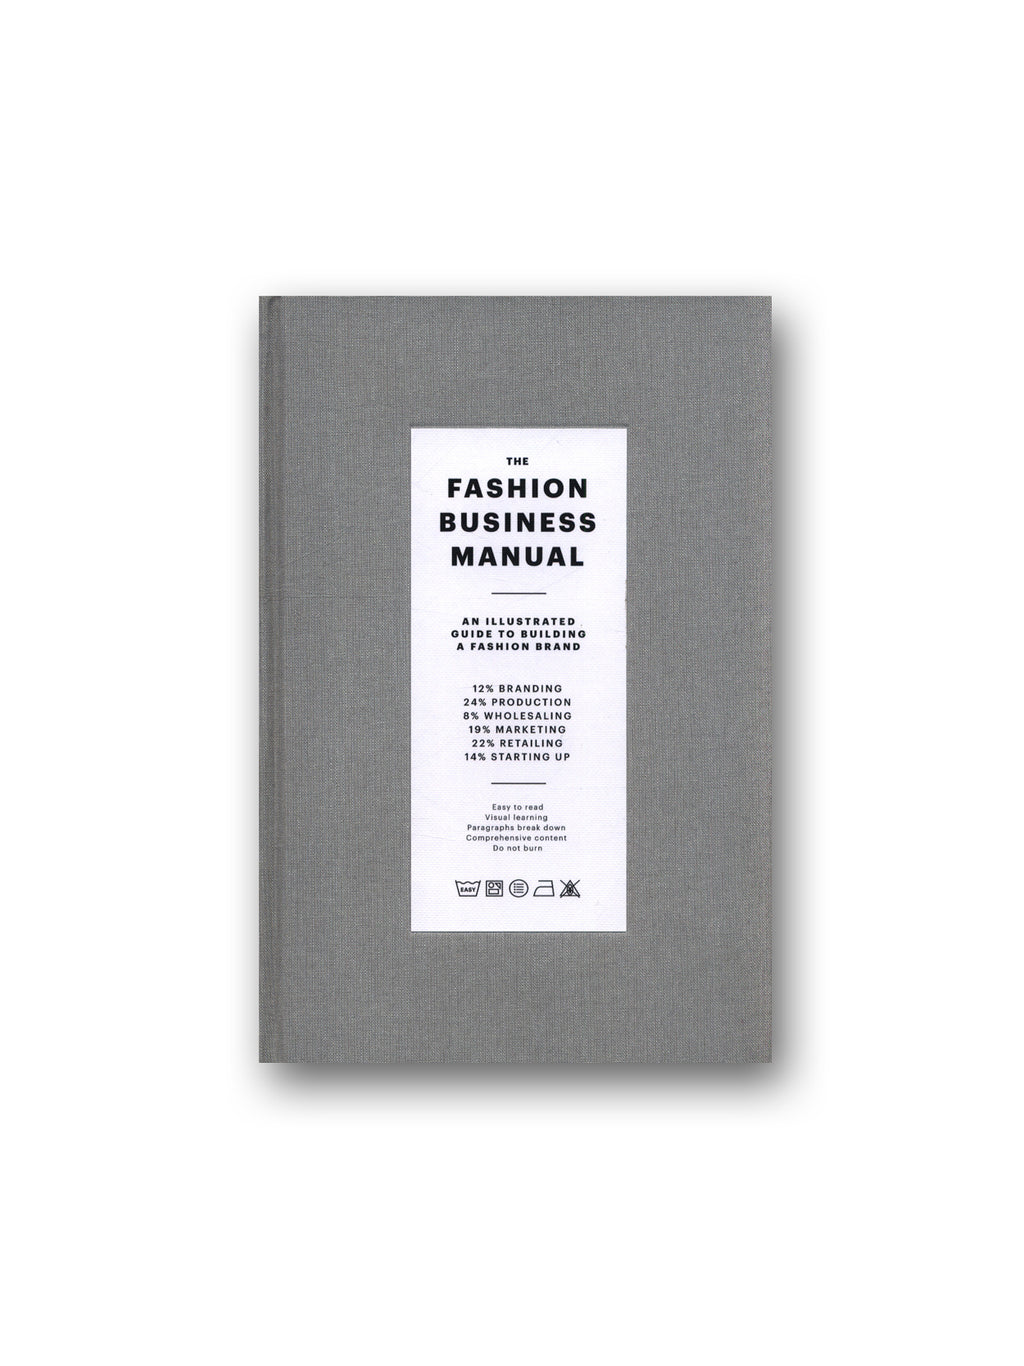 The Fashion Business Manual : An Illustrated Guide to Building a Fashion Brand